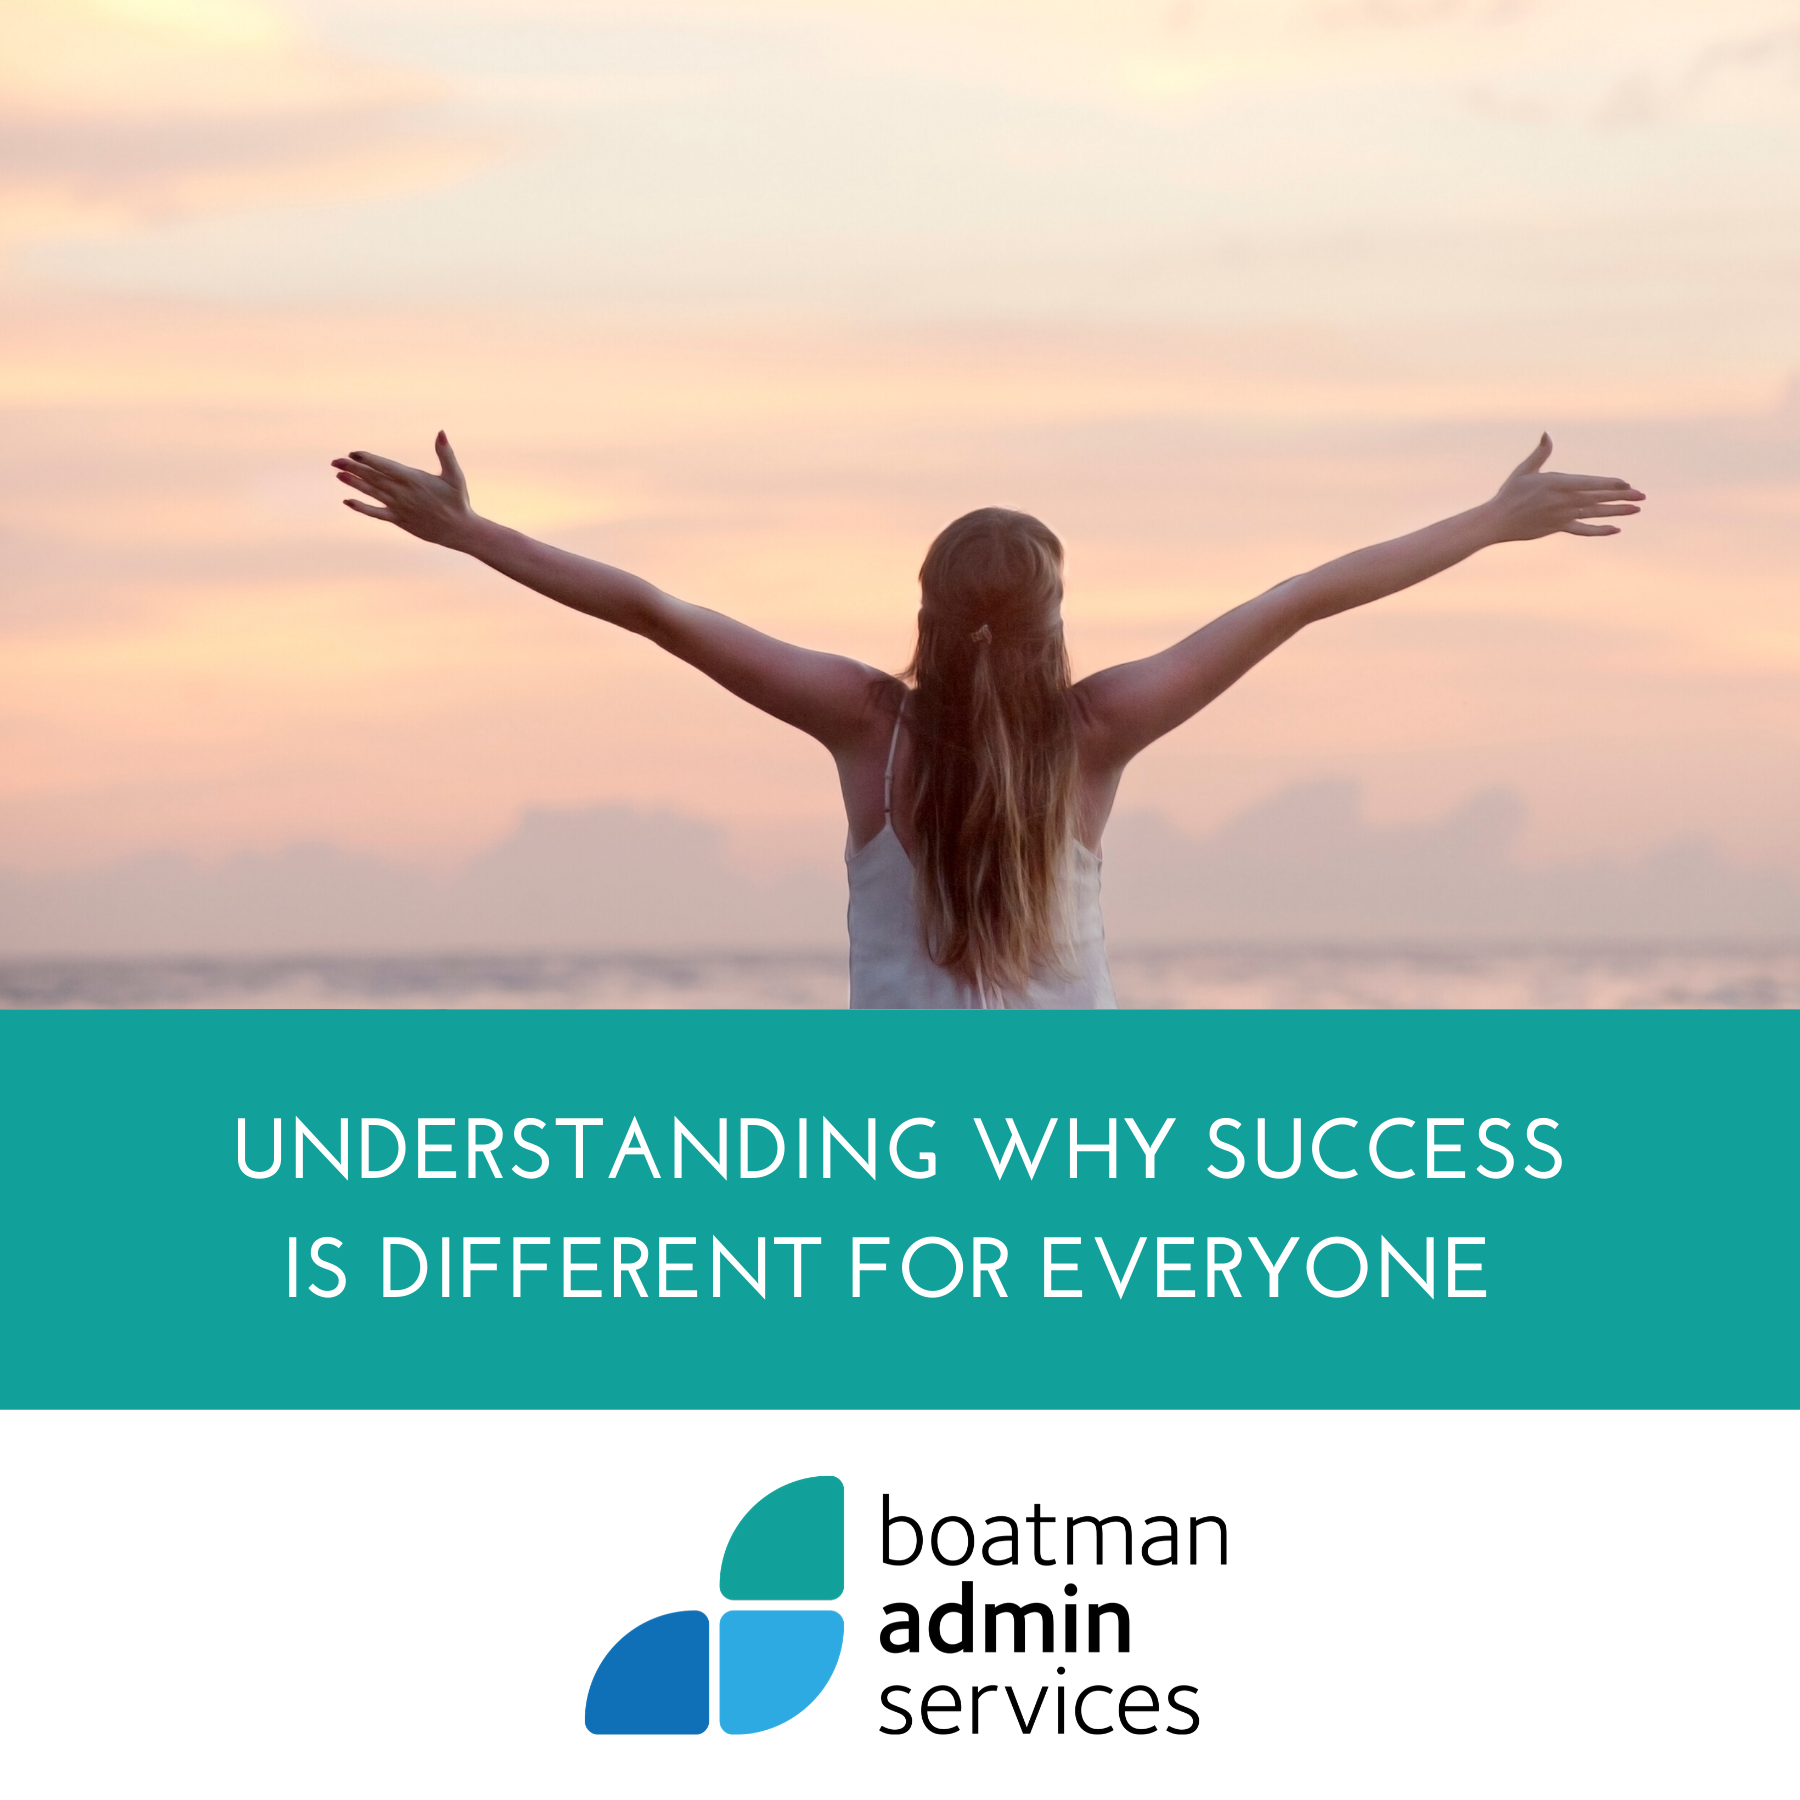 Understanding why success is different for everyone